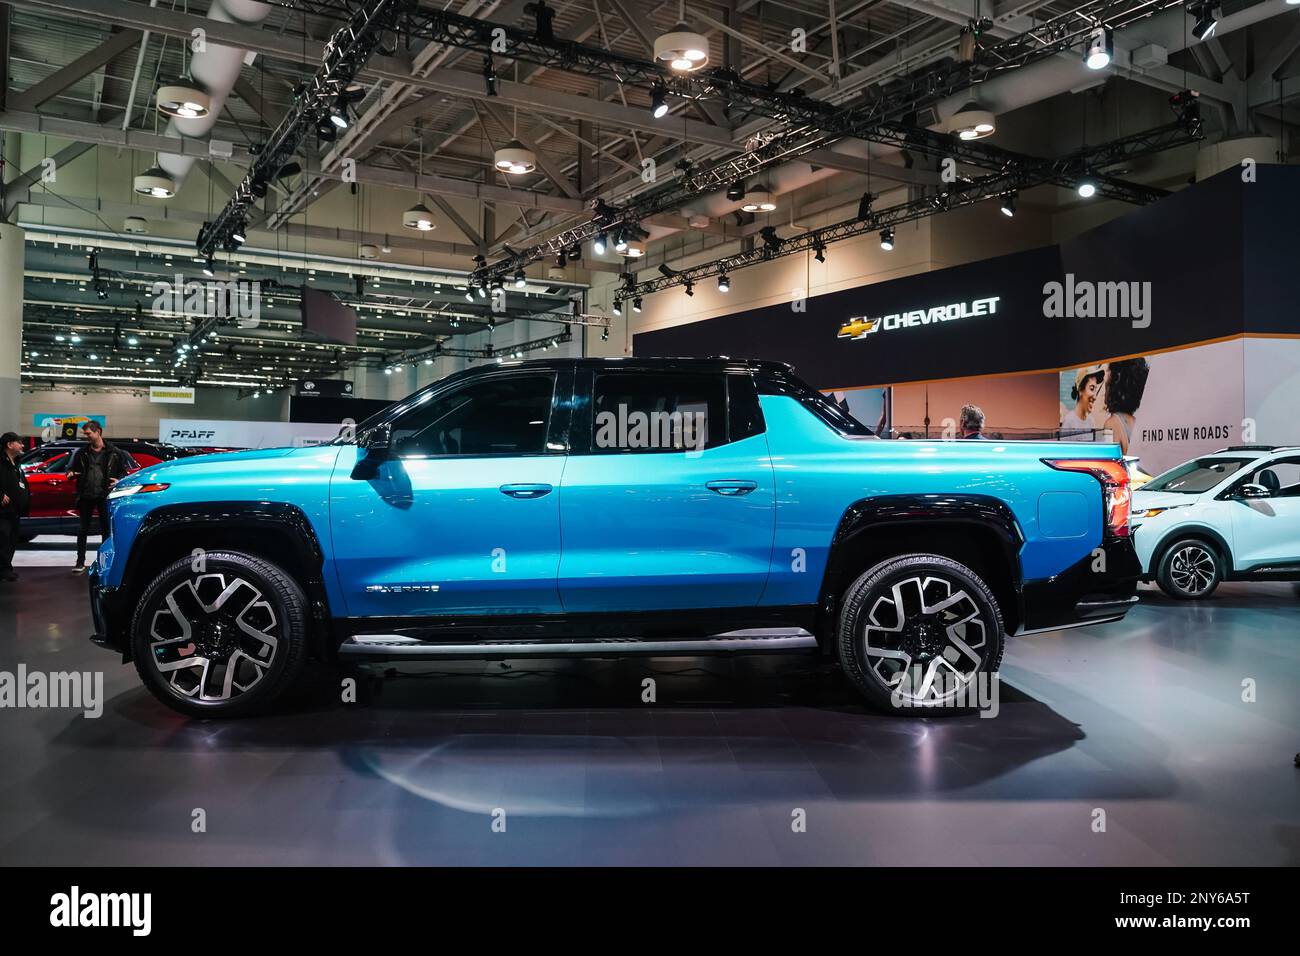 Chevrolet Silverado electric pickup truck in blue, on display at a car show Stock Photo